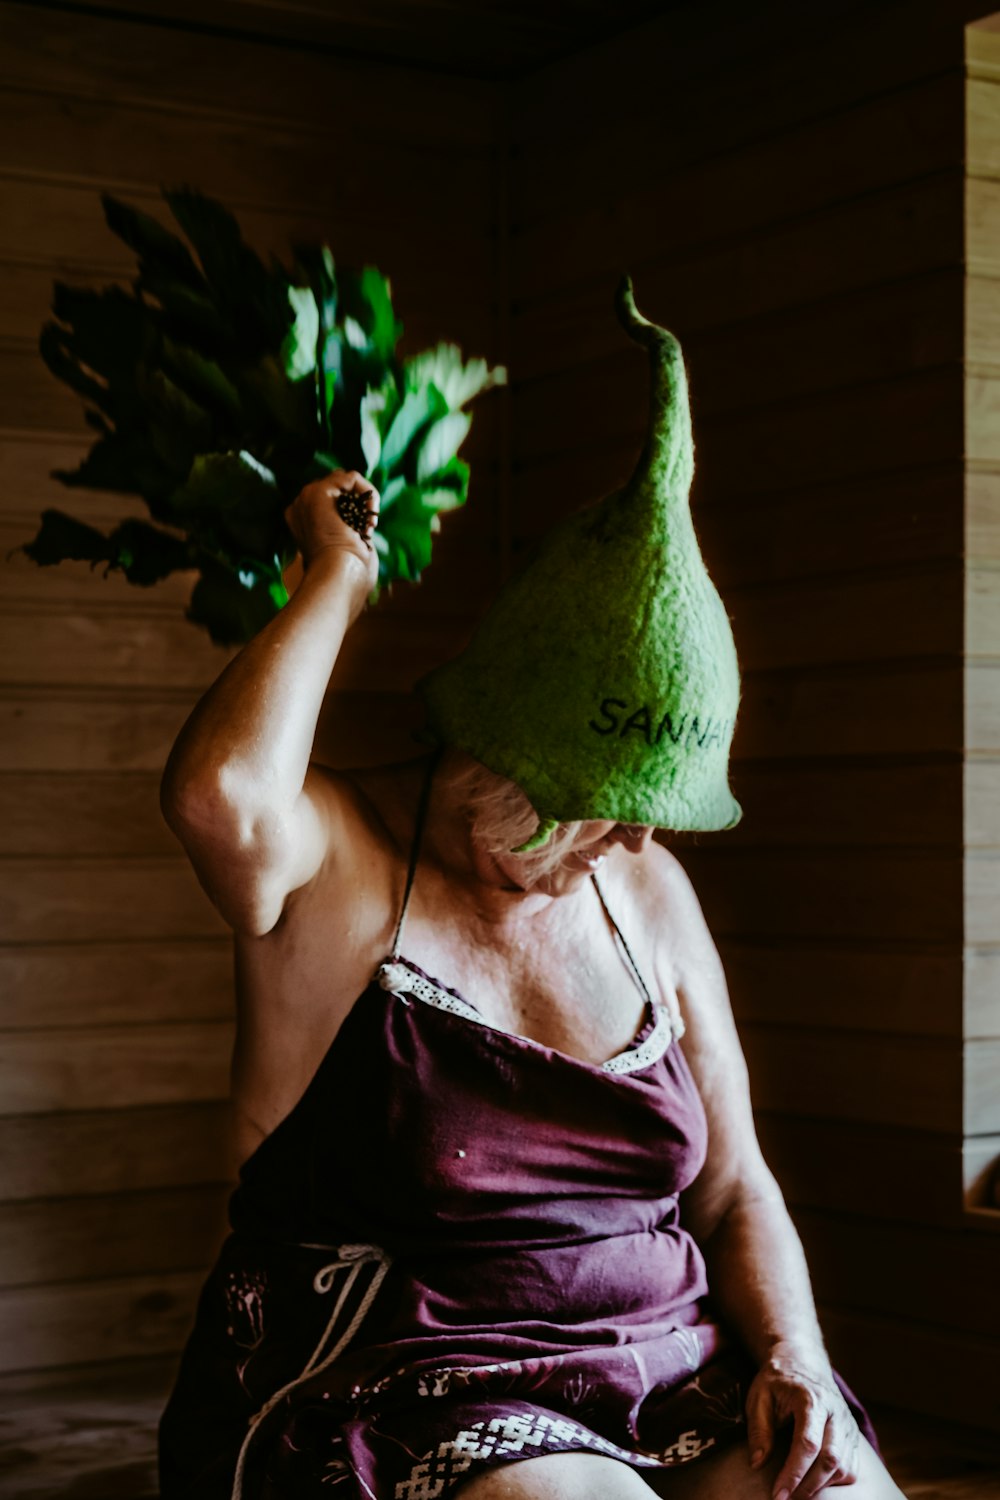 a person holding a plant